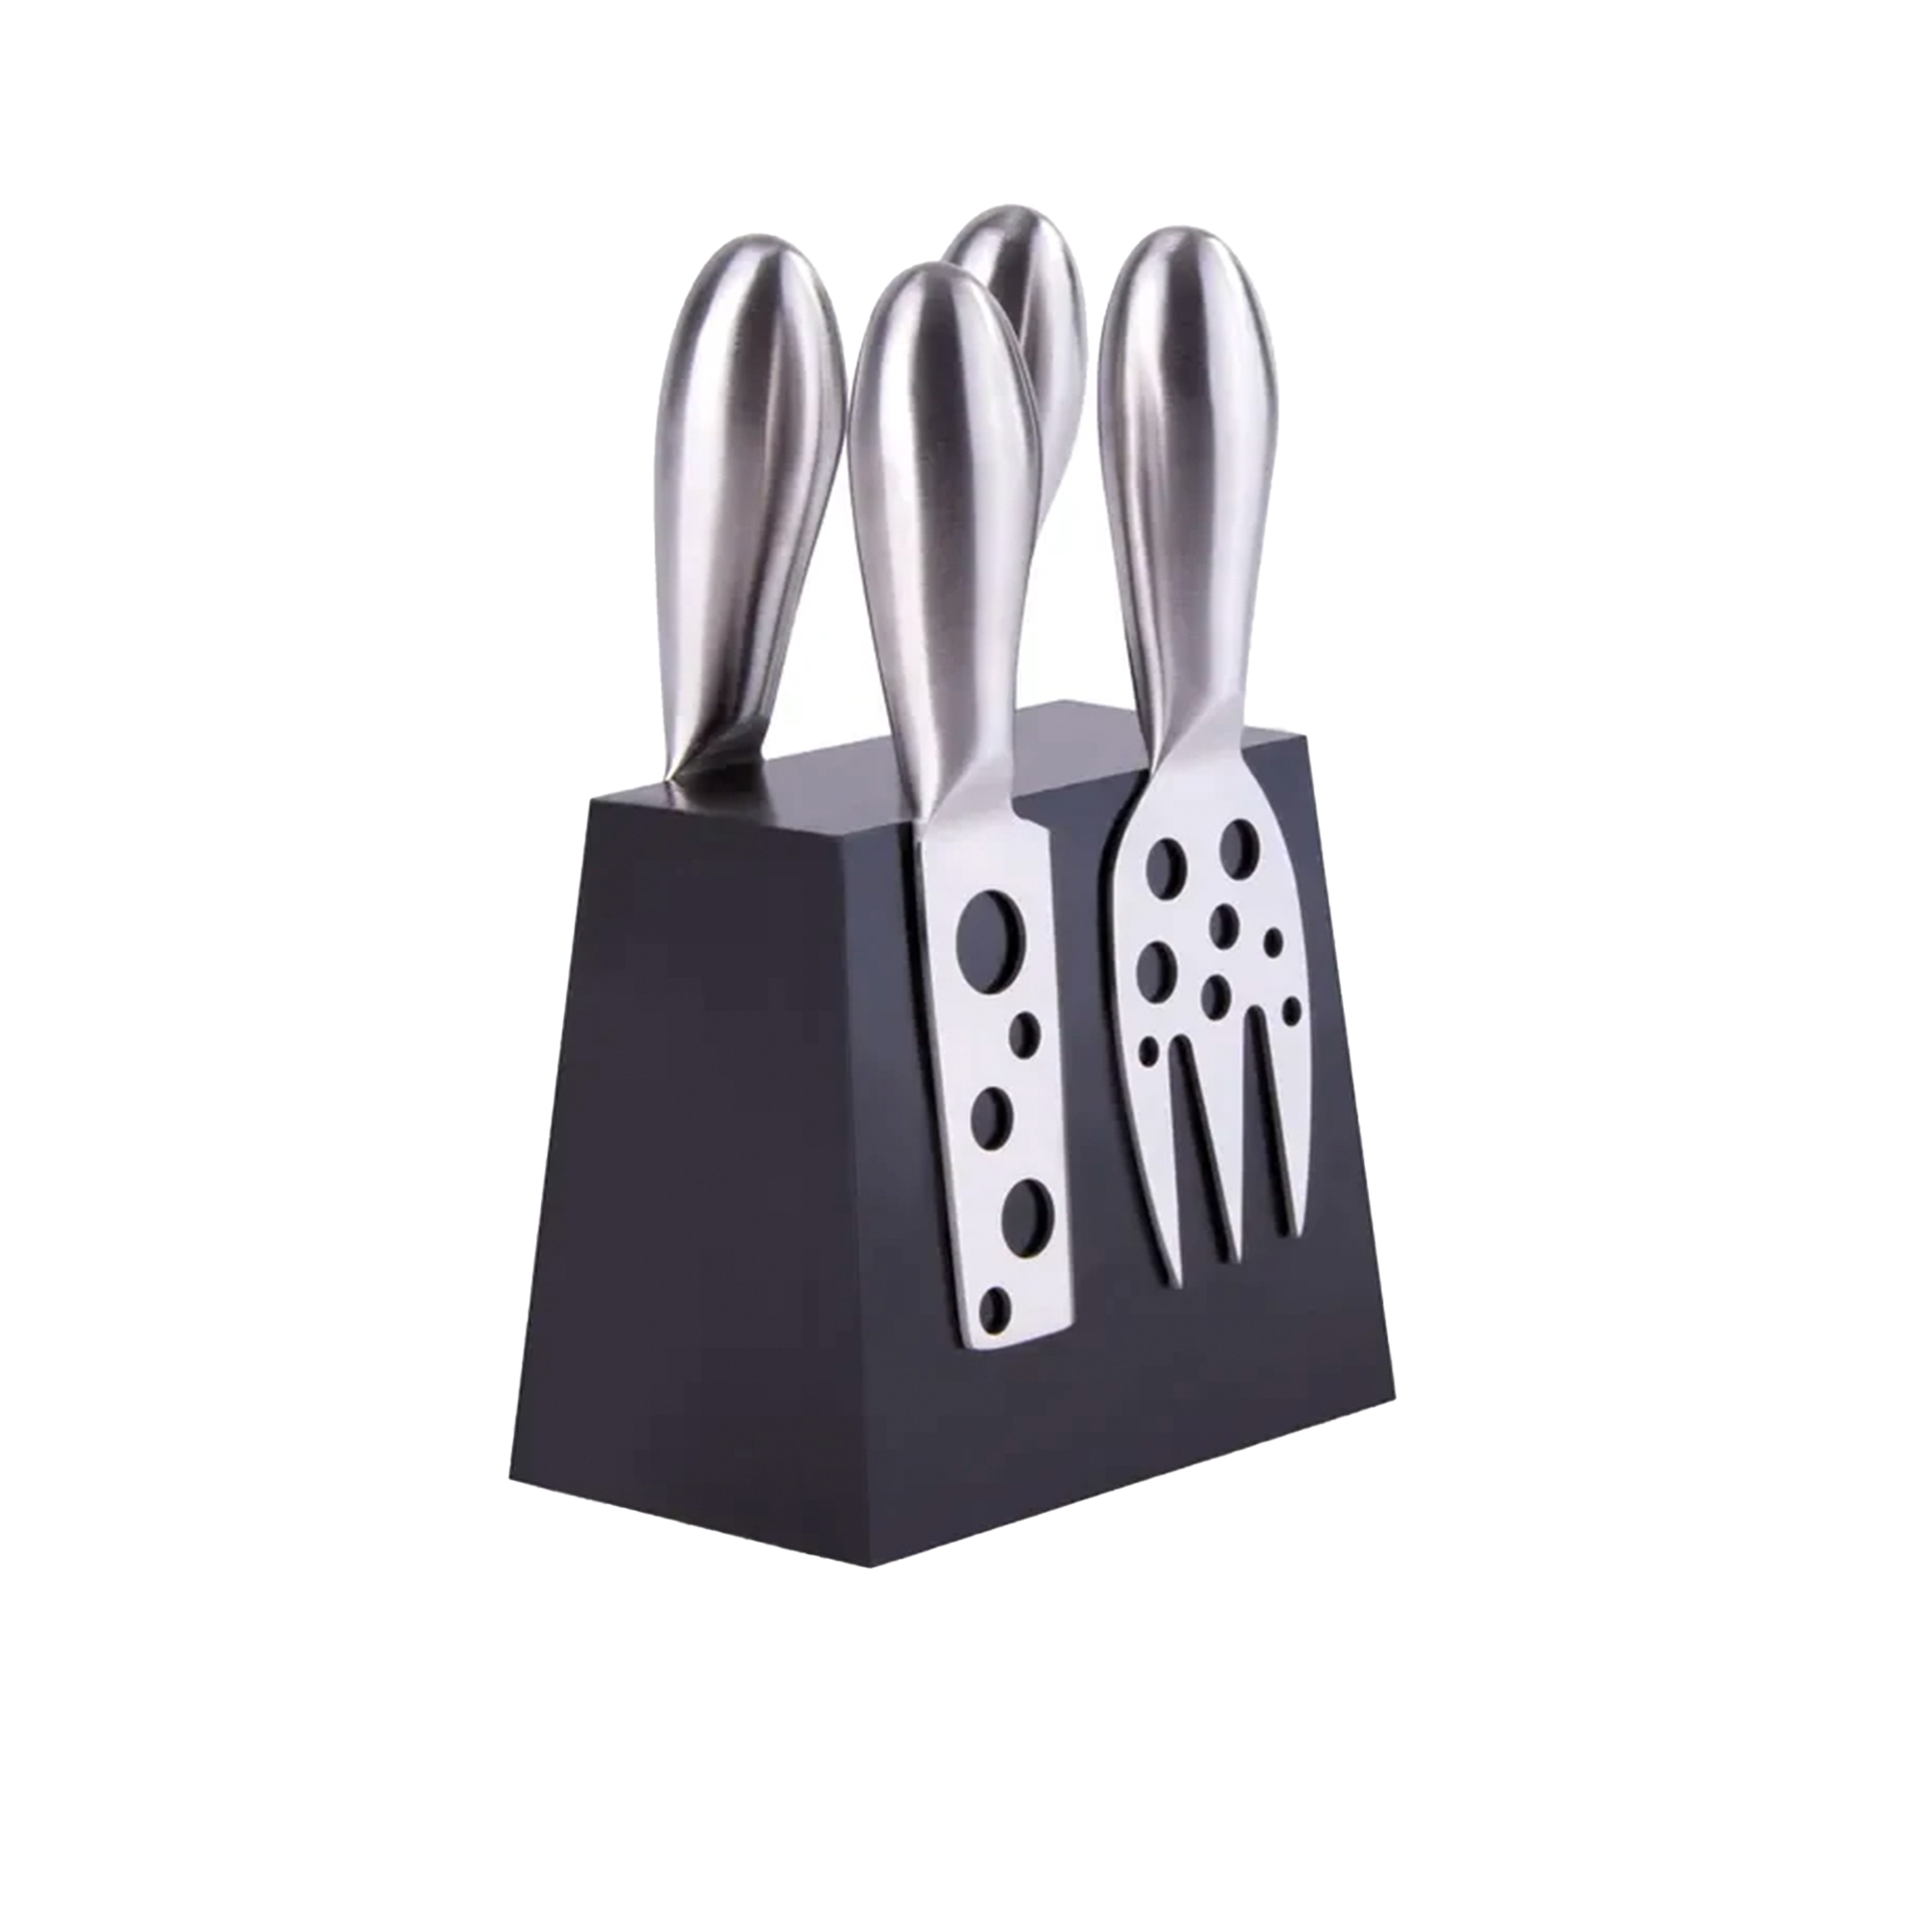 Clevinger Stainless Steel Hobson Cheese Knife Set with Magnetic Block Set of 4 Image 2